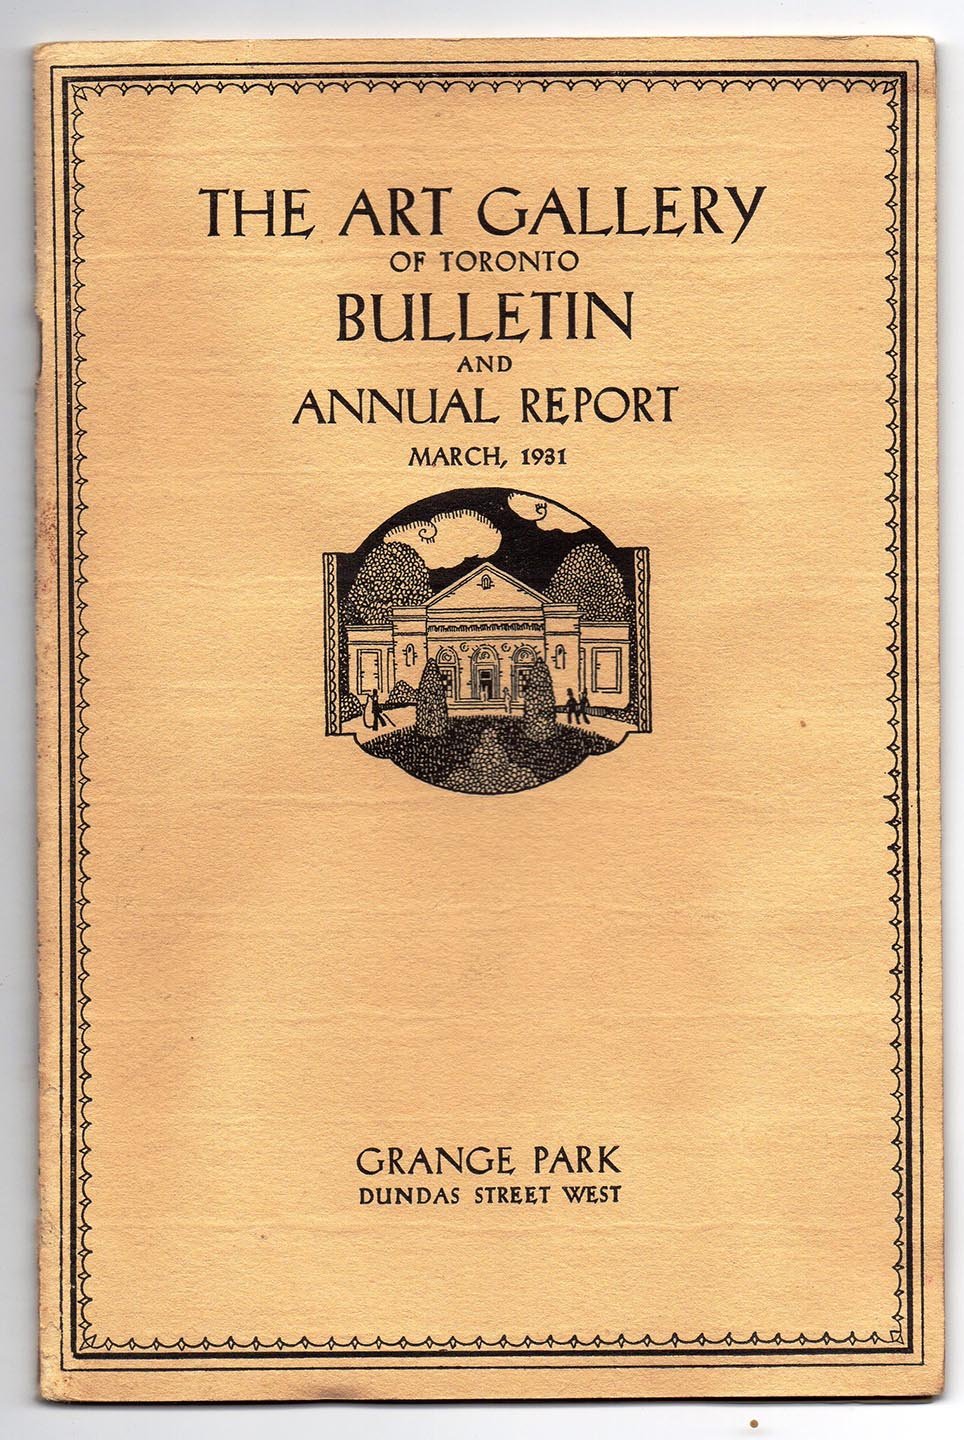 The Art Gallery of Toronto Bulletin and Annual Report March, 1931